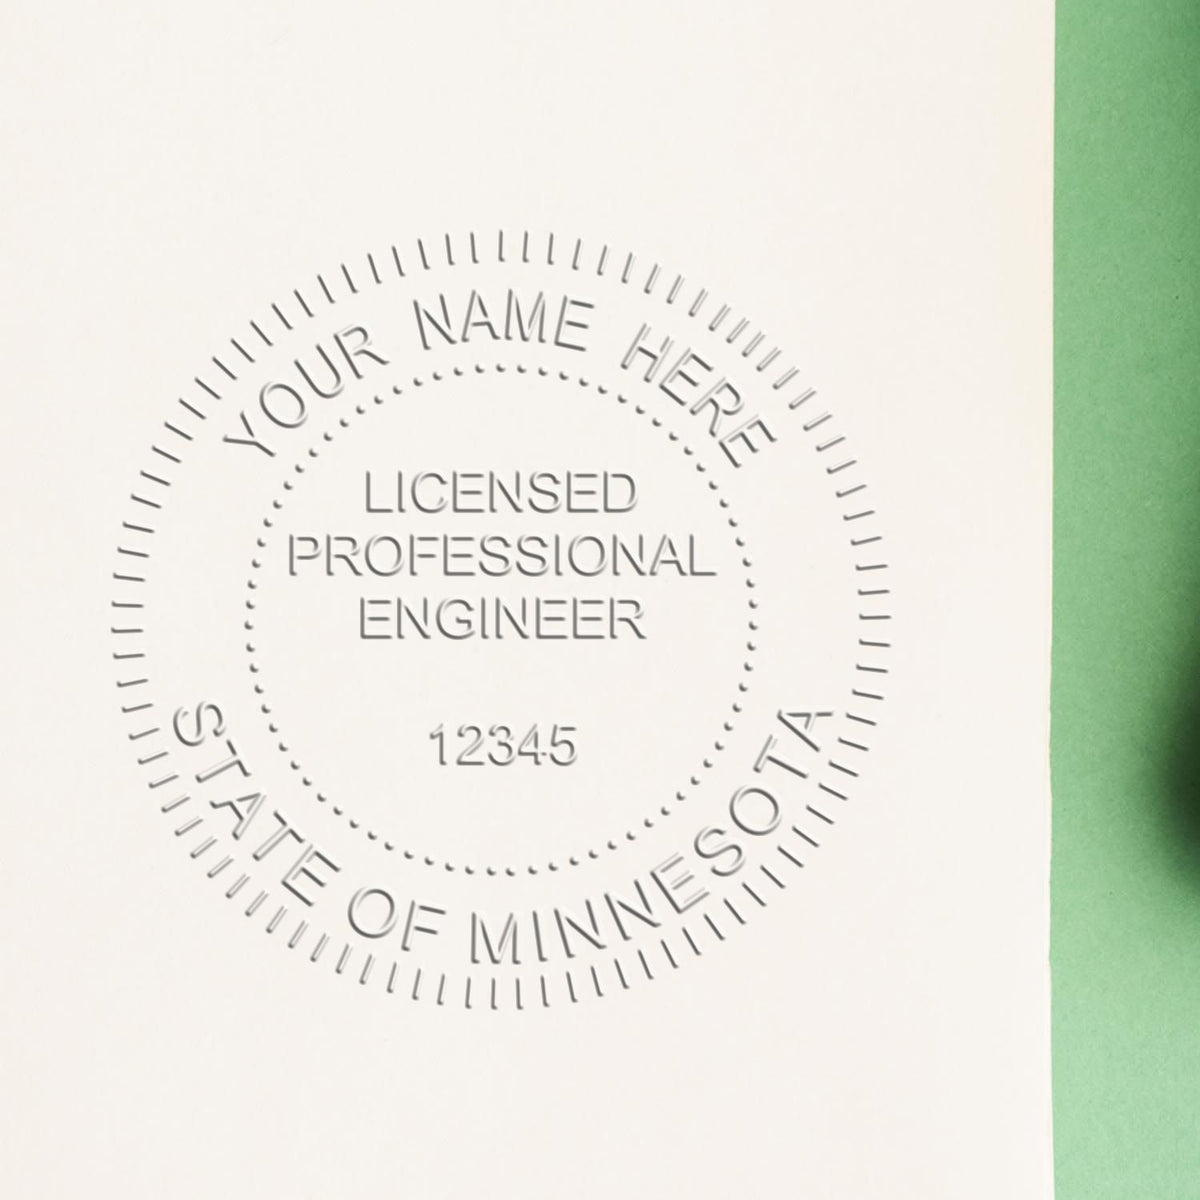 A photograph of the Long Reach Minnesota PE Seal stamp impression reveals a vivid, professional image of the on paper.